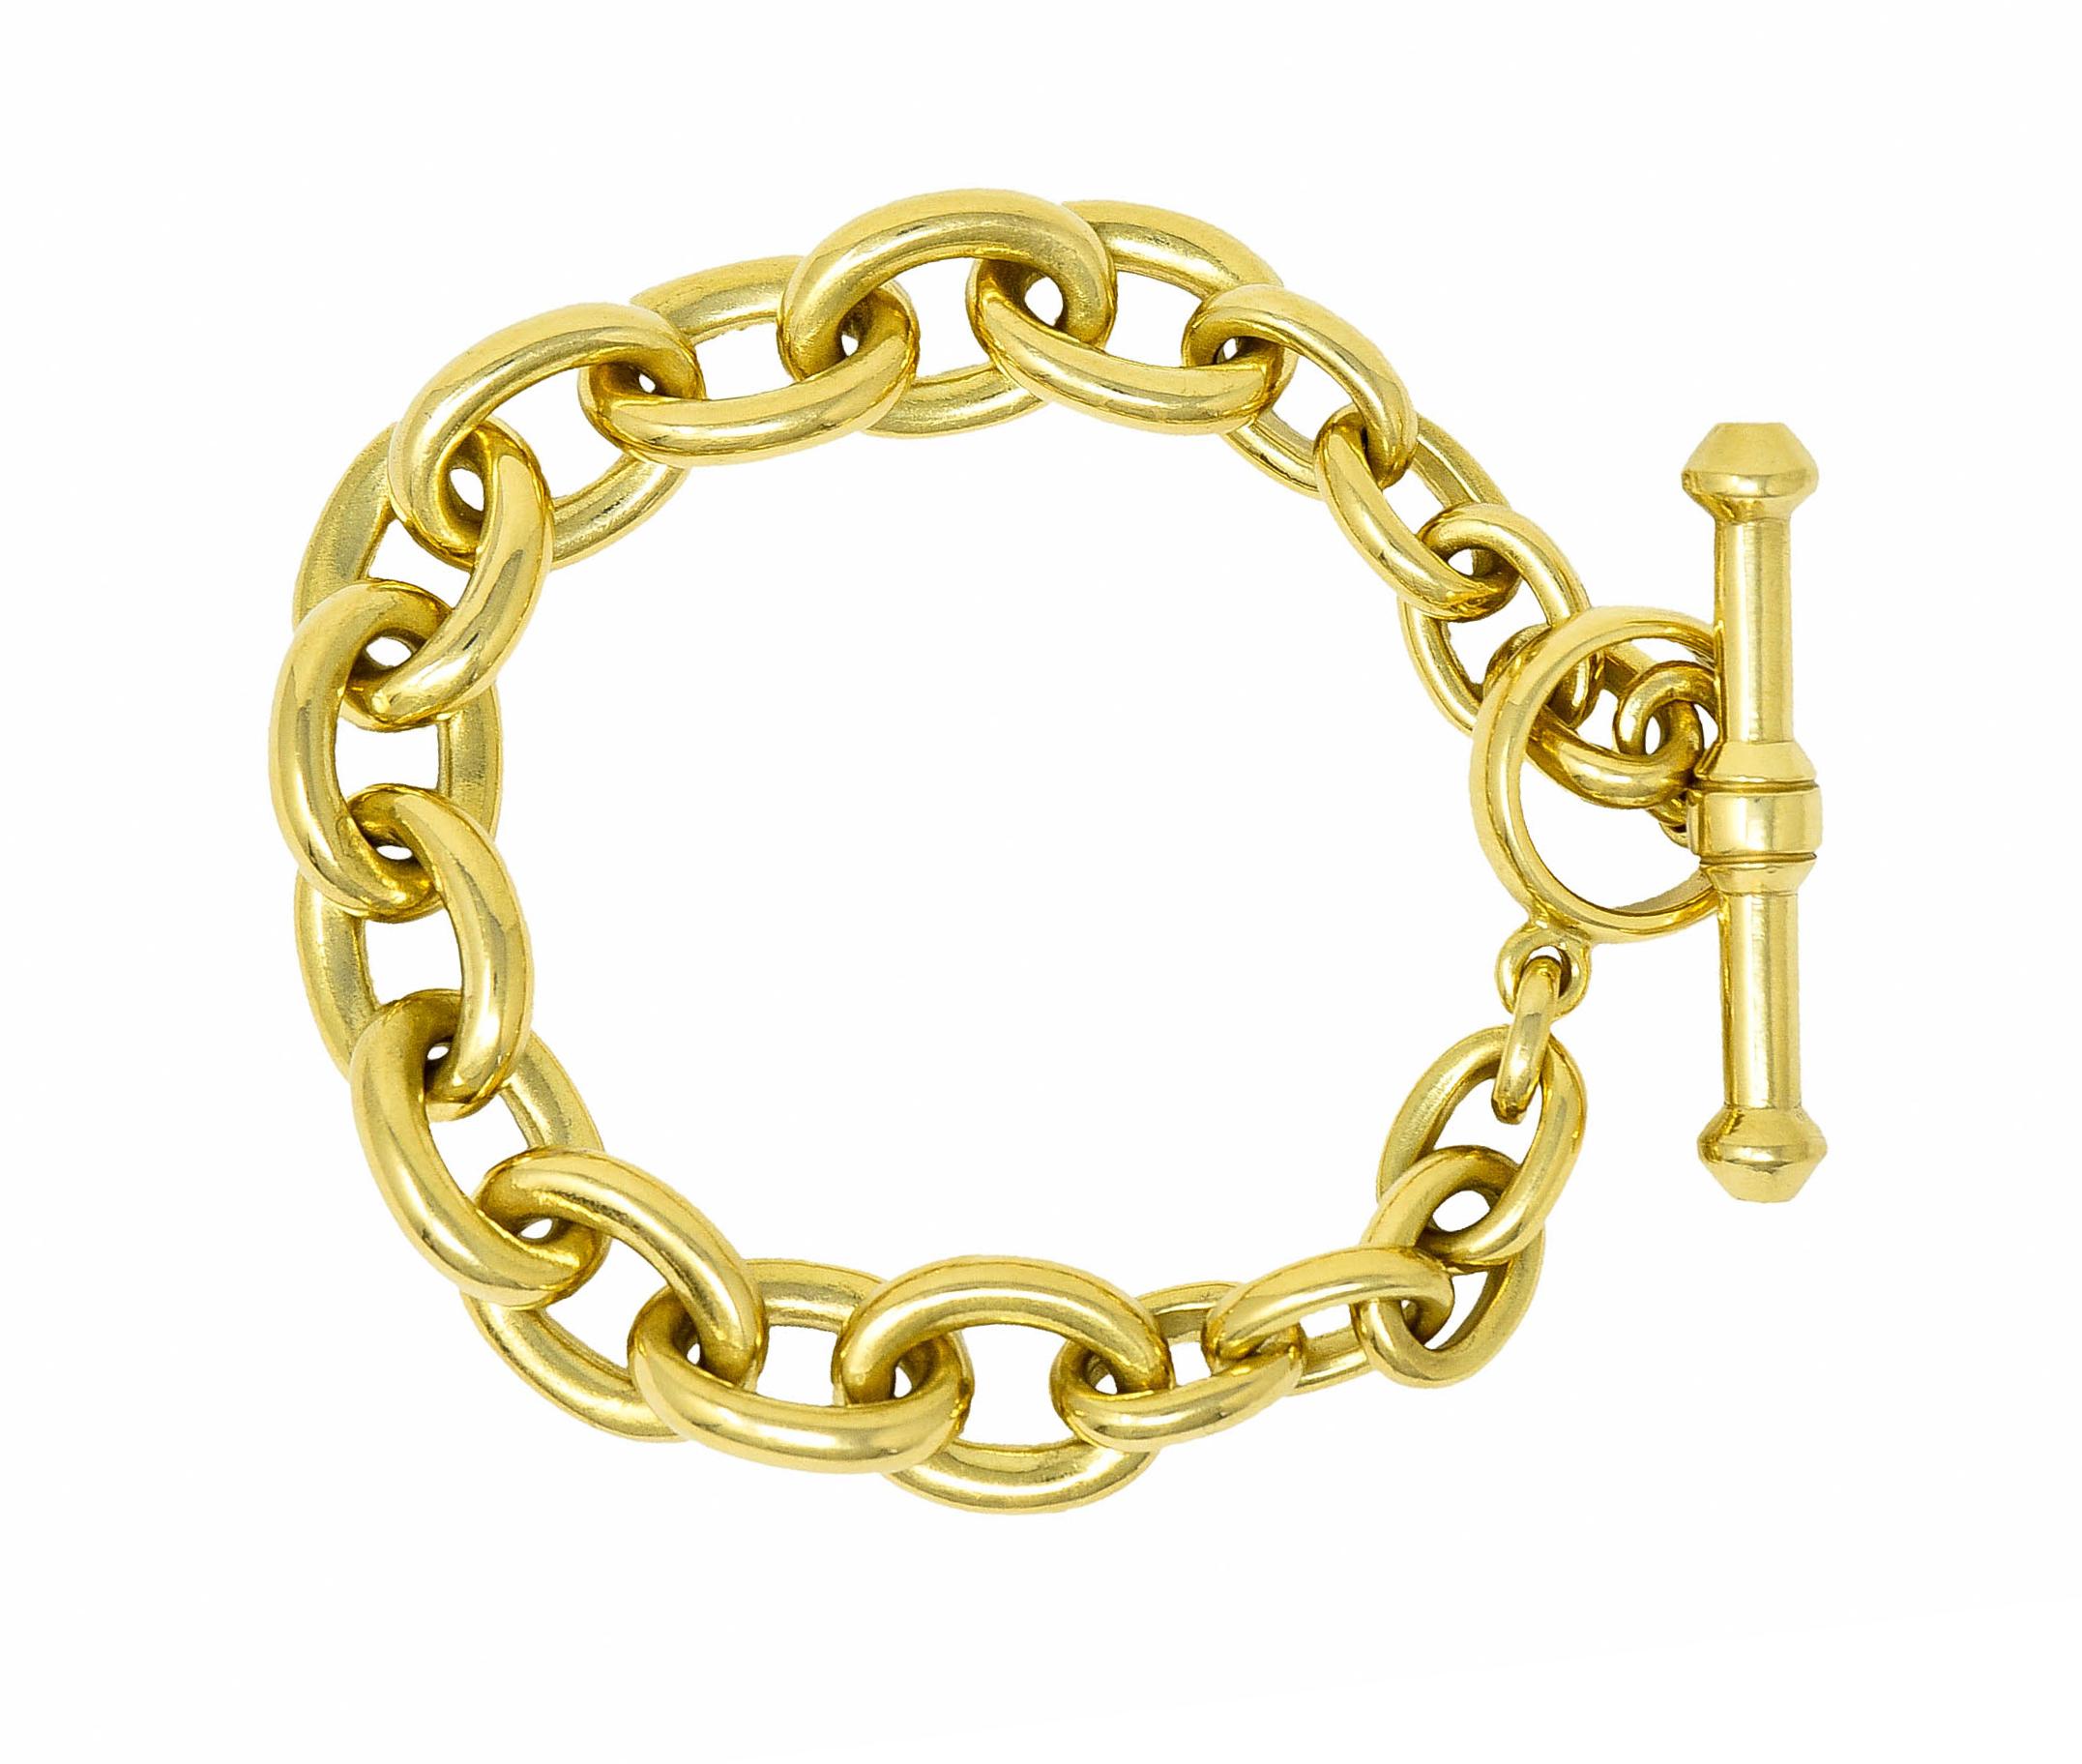 Bracelet is comprised of polished gold curb links

Completed by a stylized and oversized toggle bar clasp

Stamped 18K for 18 karat gold

Maker's mark and fully signed Kieselstein Cord

Inscribed origin USA and dated 1984

Length: 8 1/4